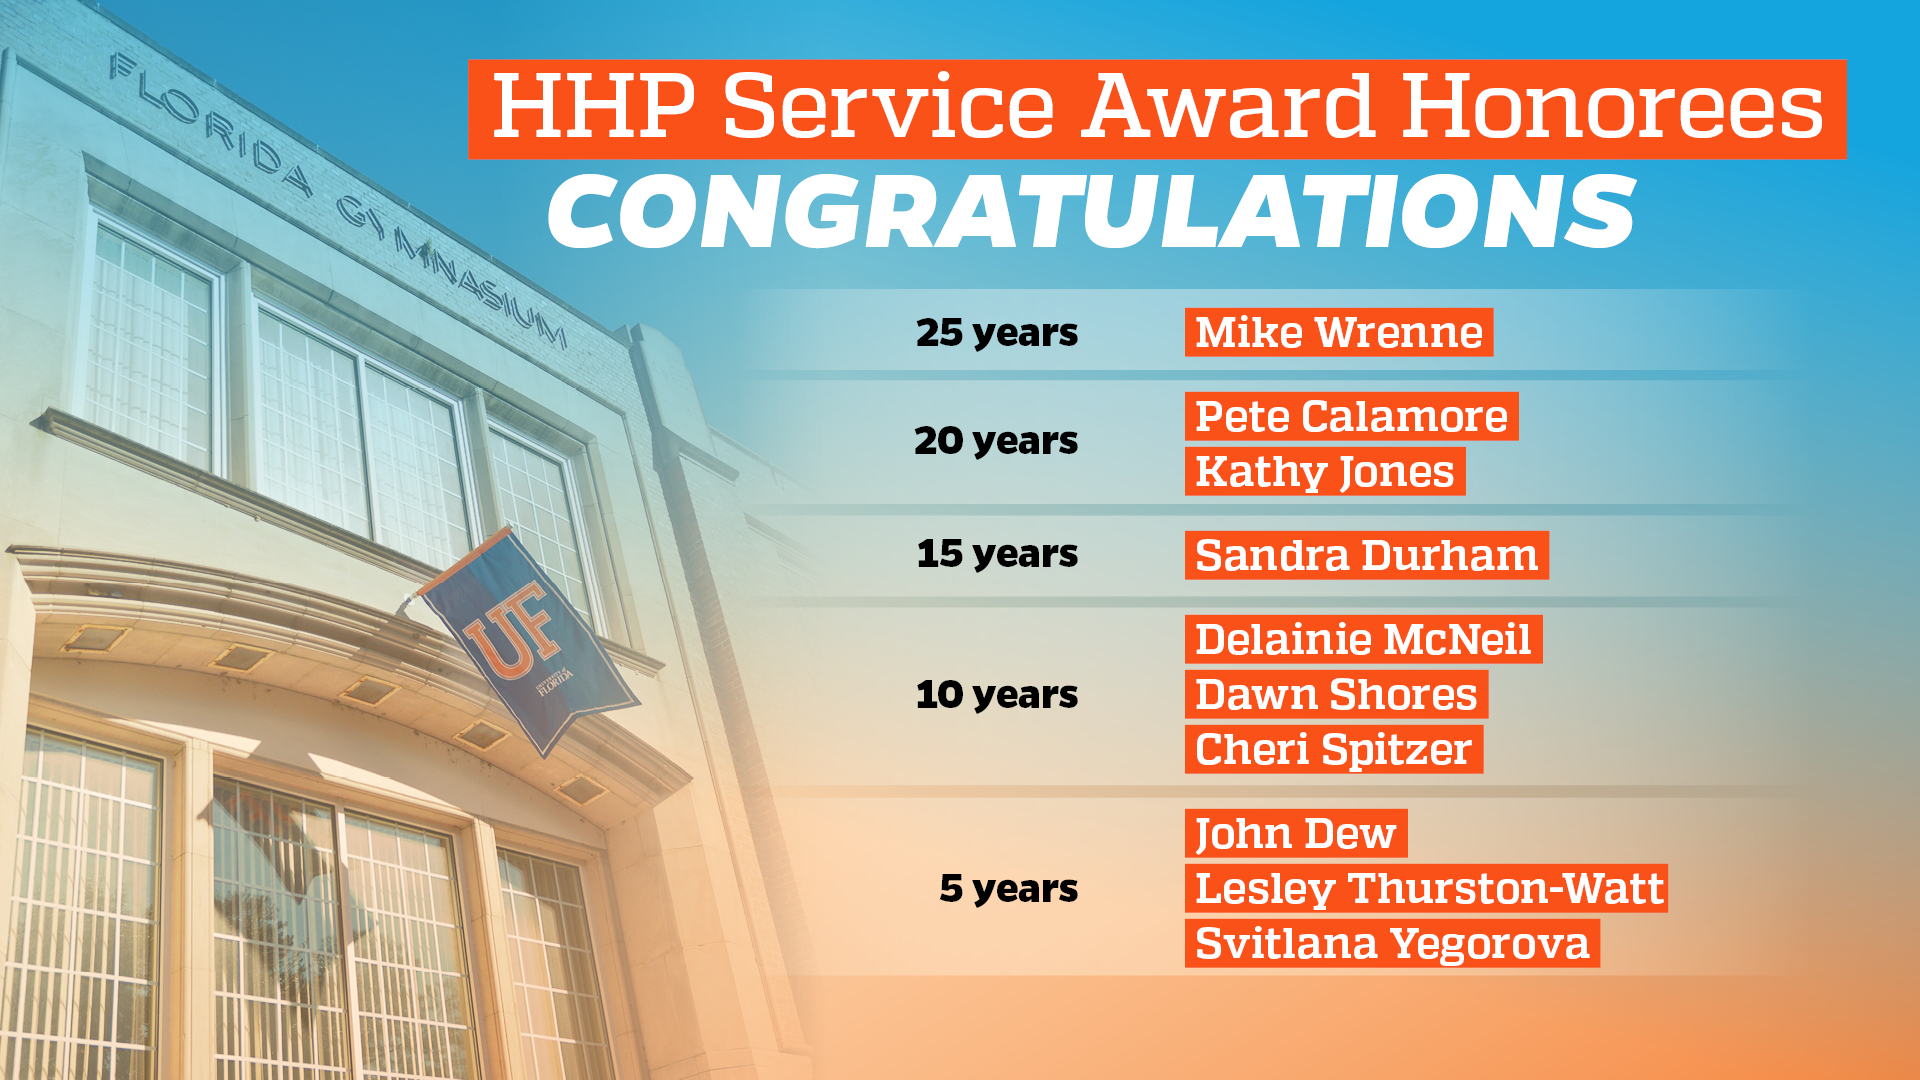 Congrats and thank you to our dedicated staff for their years of service